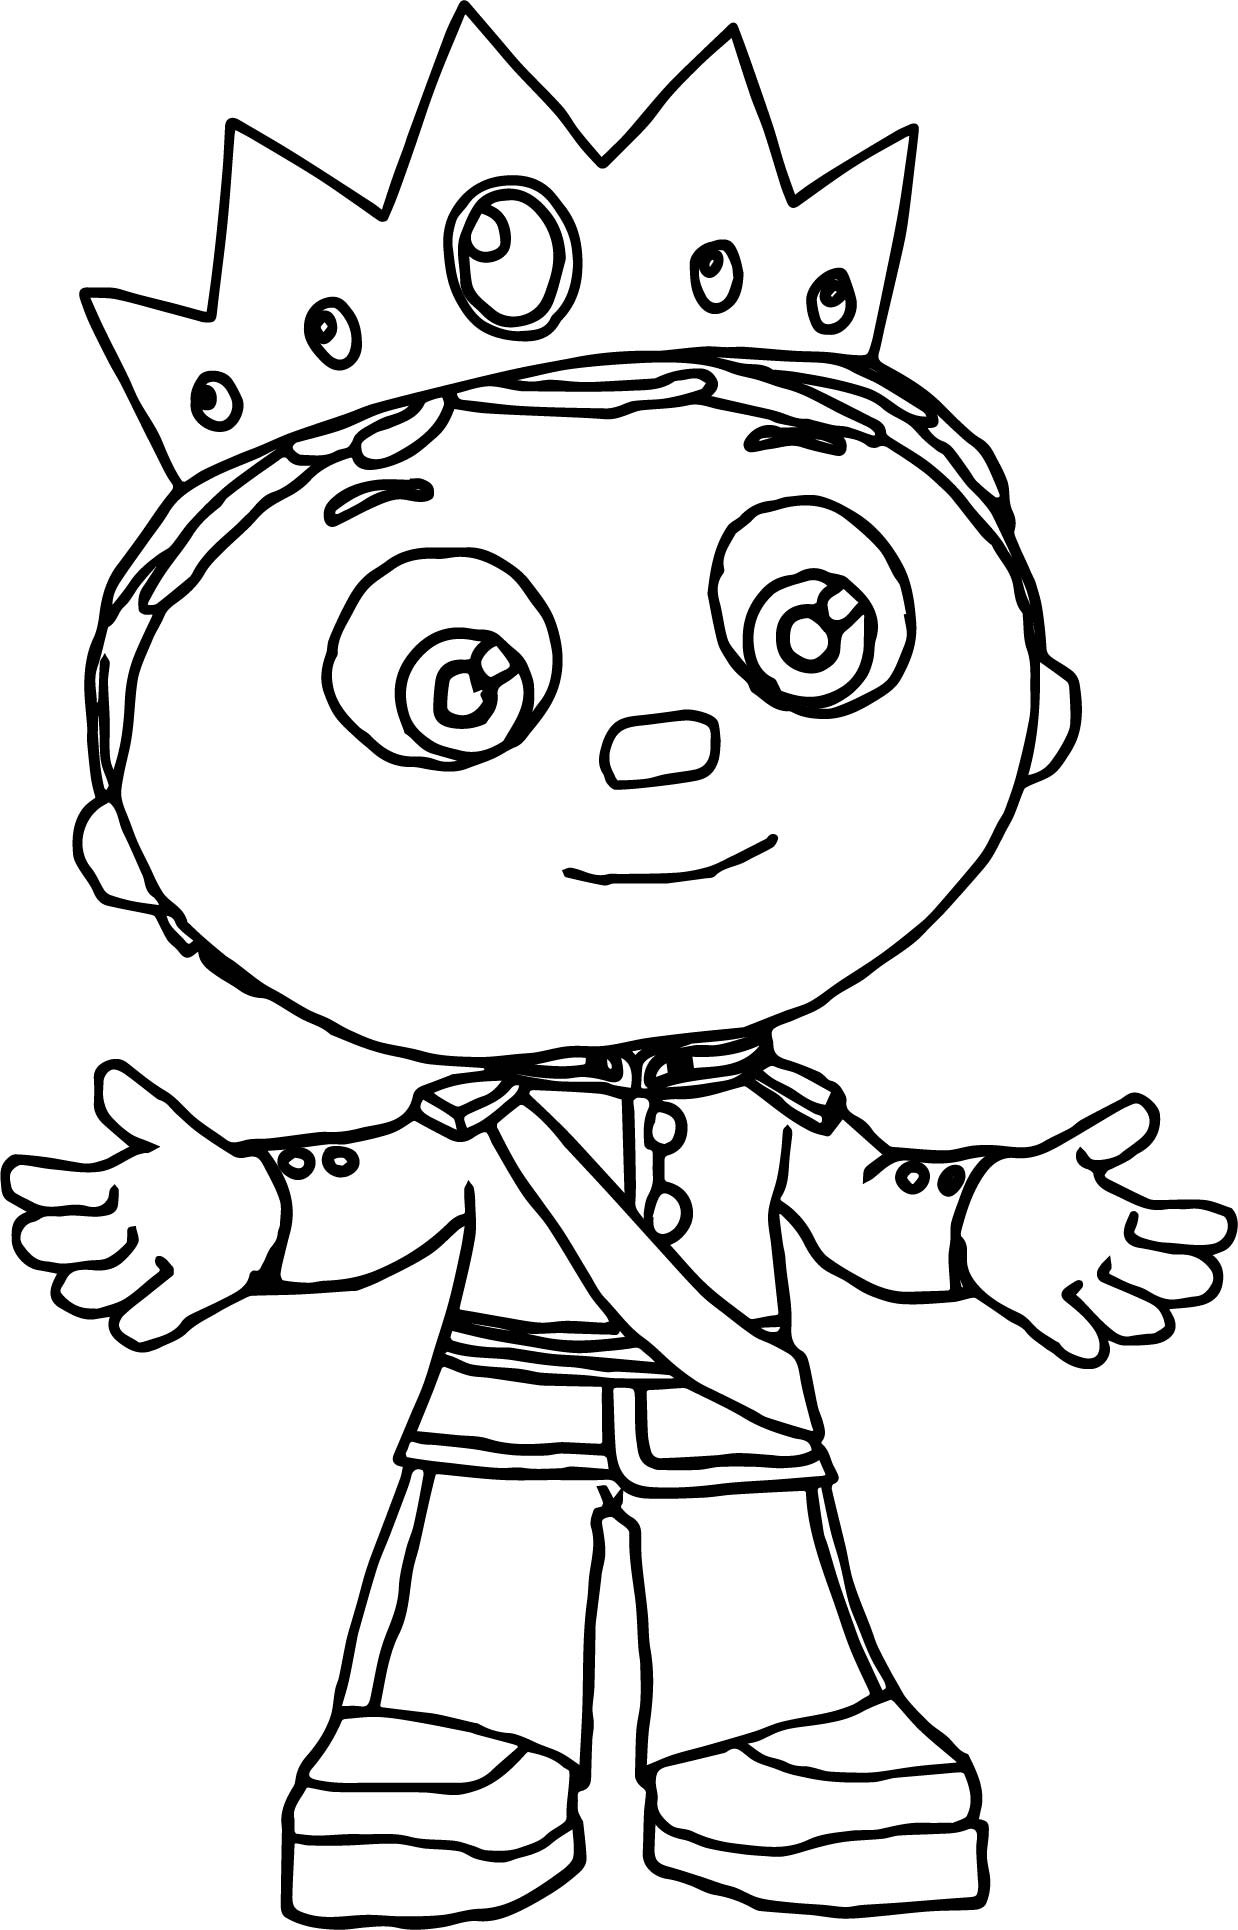 Popular Coloring Pages For Kids
 Super Why Coloring Pages Best Coloring Pages For Kids